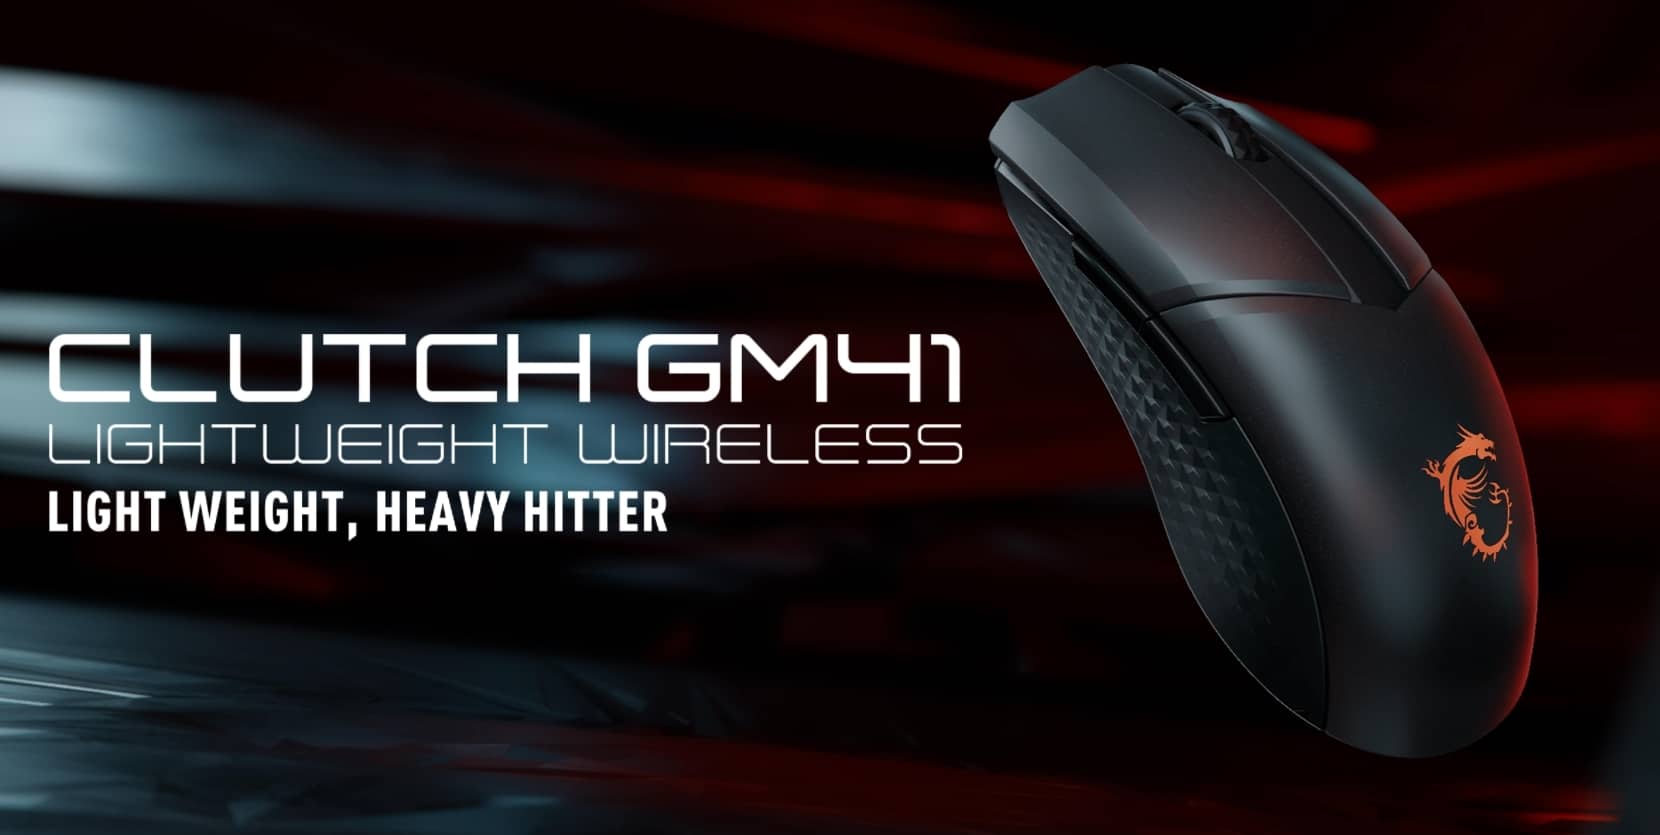 Discover the new MSI Clutch GM41 Lightweight Wireless mouse -